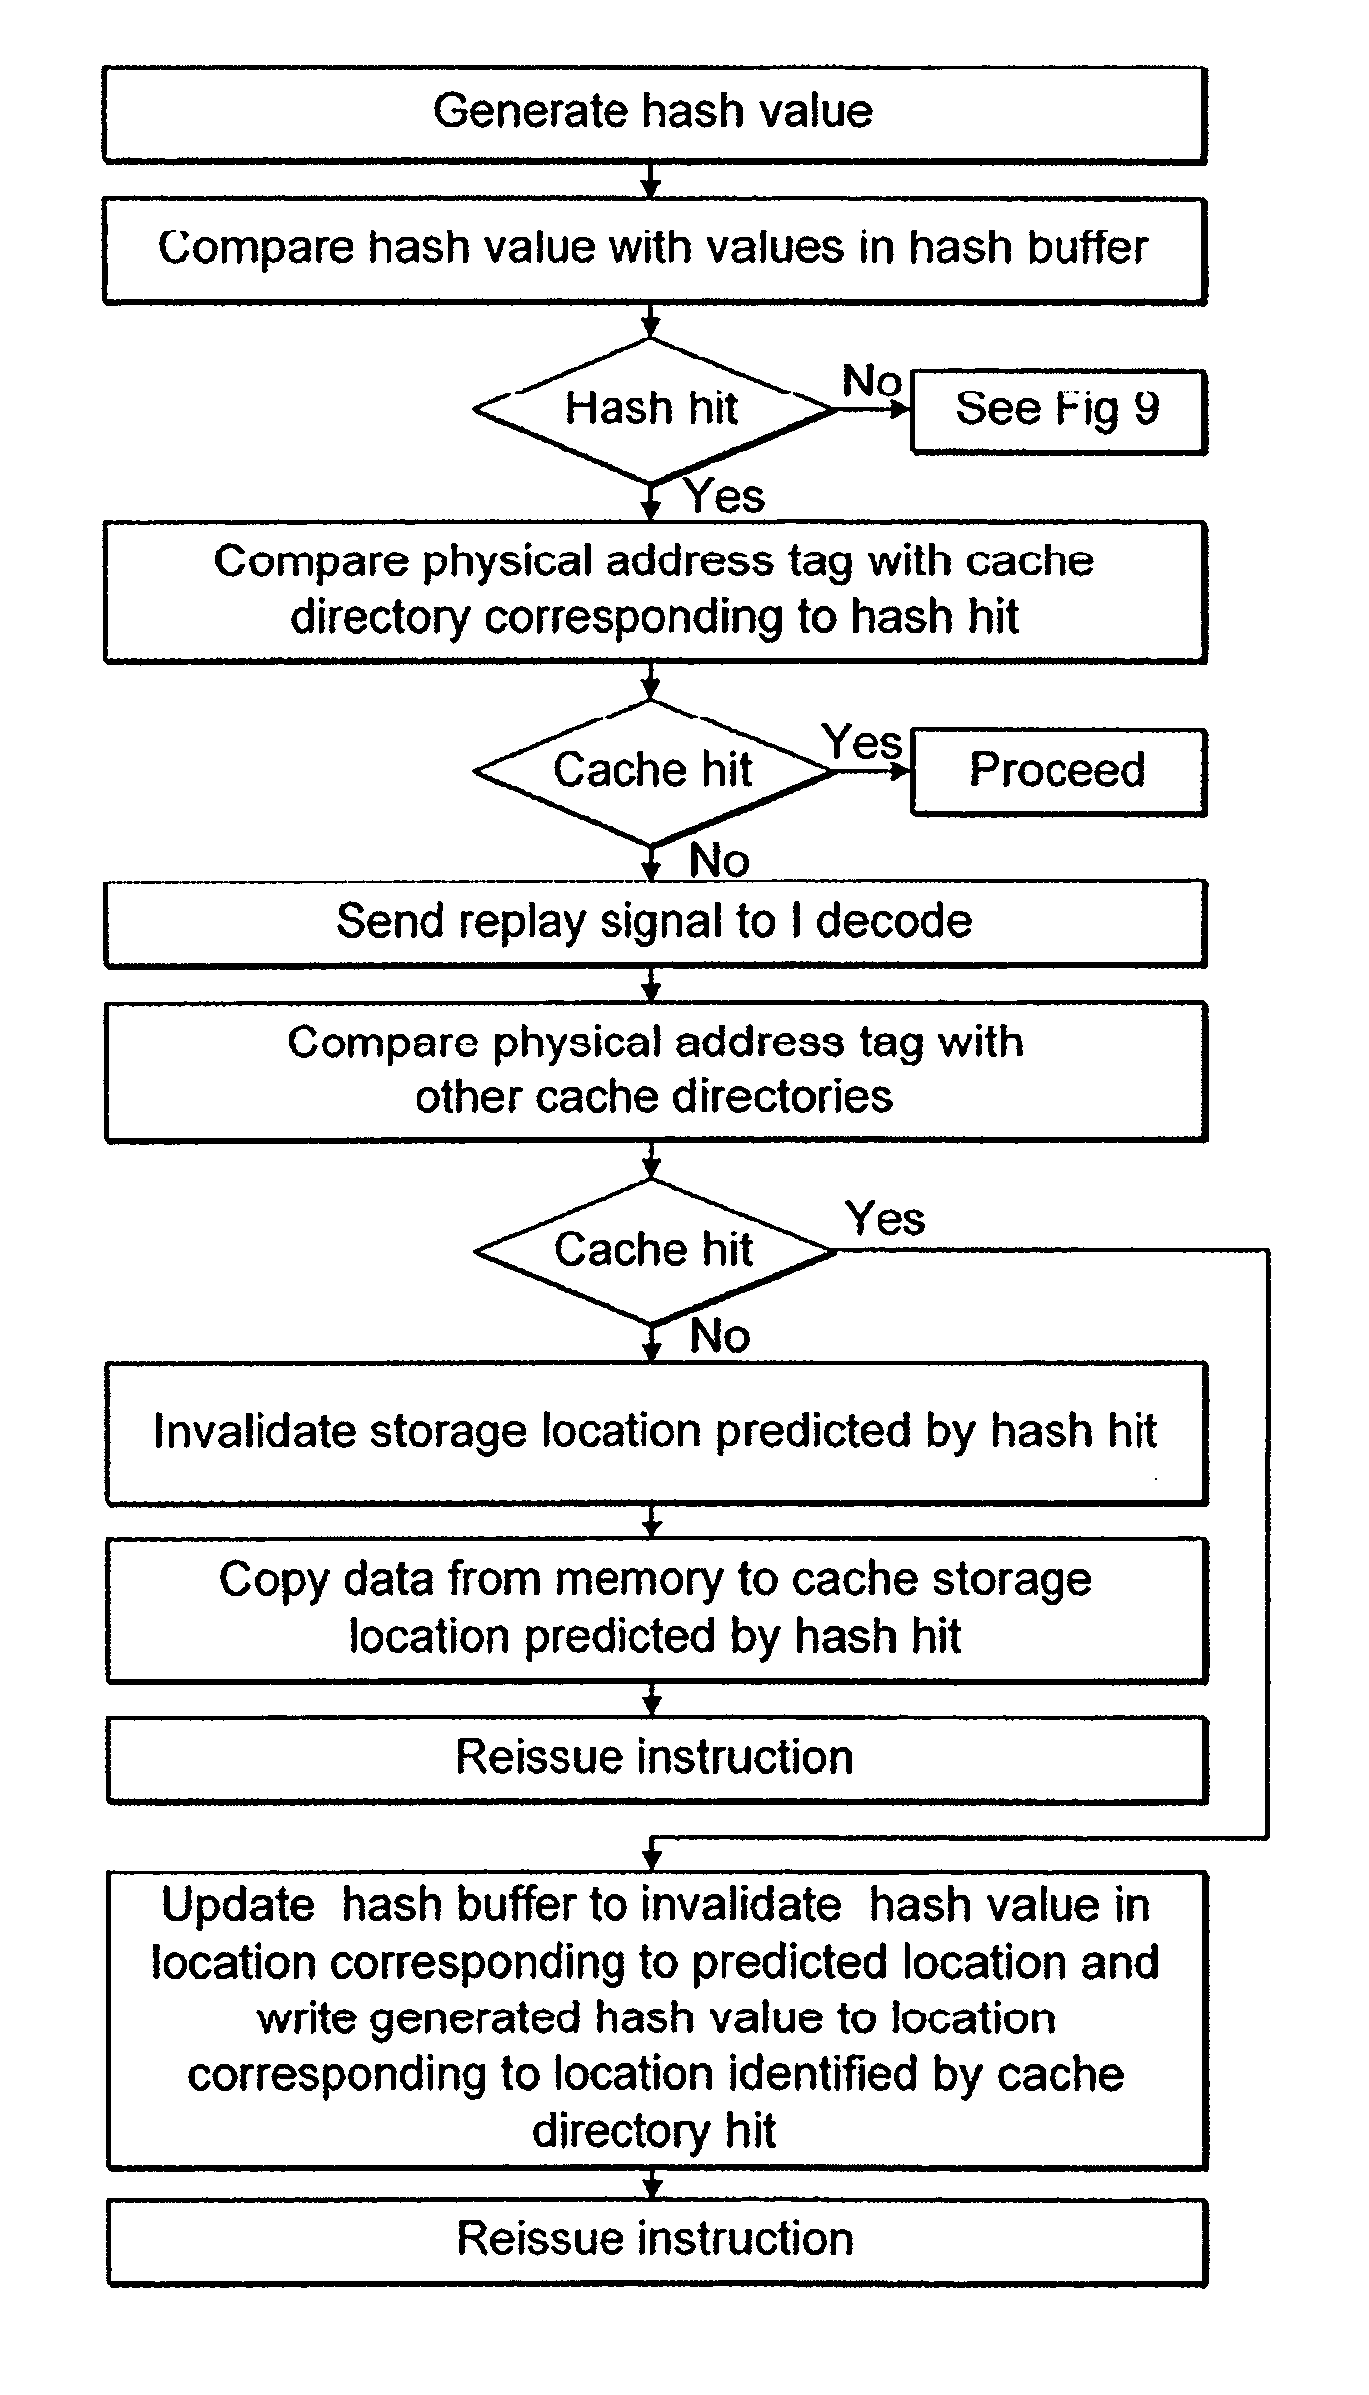 Indicating storage locations within caches